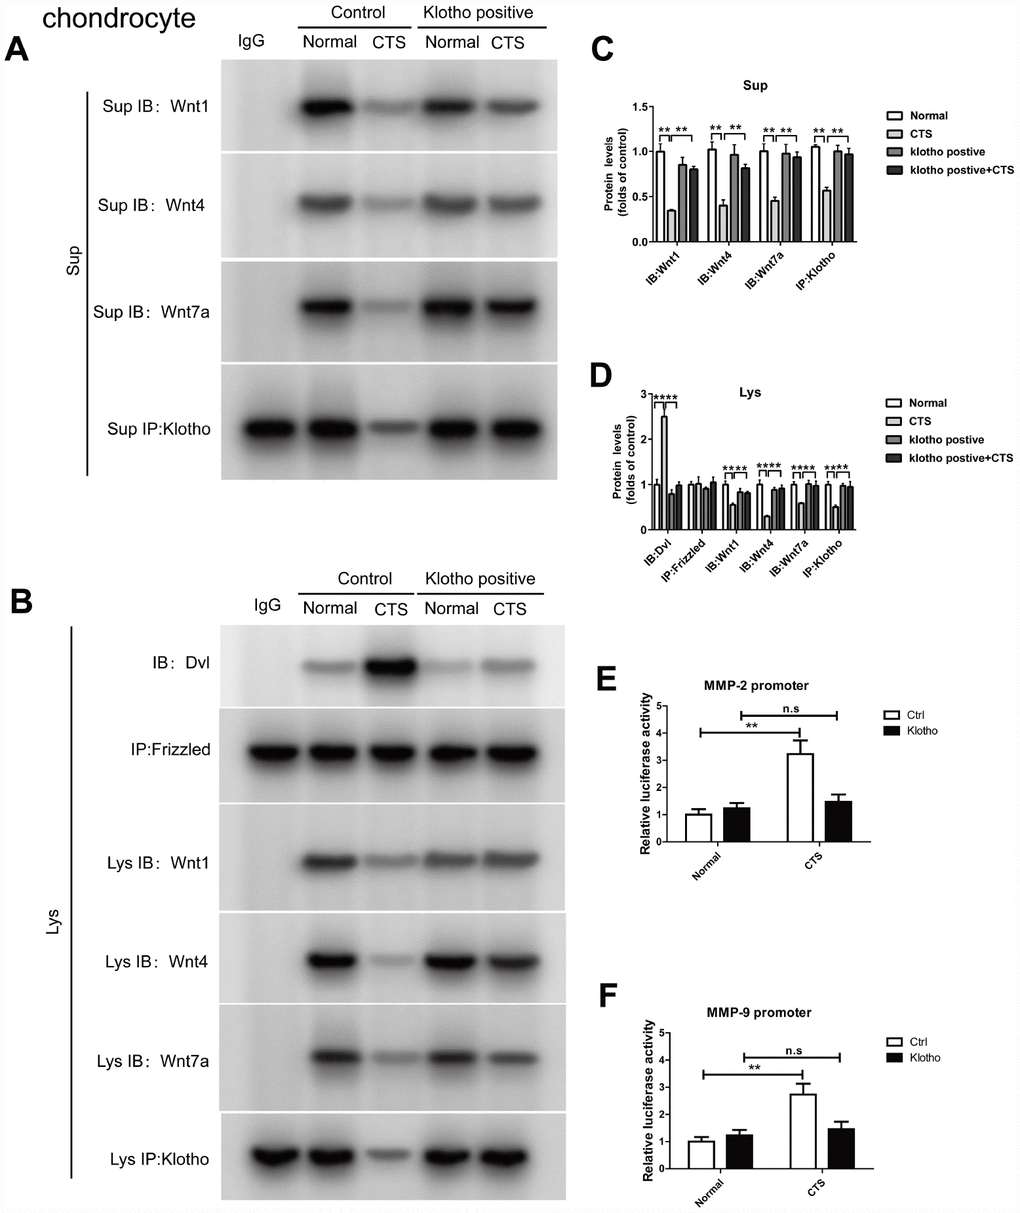 Over-expressed Klotho binds to Wnt and blocks Wnt-mediated gene transcription in vitro. Chondrocytes were incubated with or without CTS(1 HZ) for 48 hours. Overexpression of klotho attenuated the activity of the wnt signaling pathway (A) Co-IP method was used to detect the binding of Klotho and Wnt1, Wnt4 and Wnt7a in different groups of cells supernatant. (B) Co-IP method was used to detect the binding of Klotho and Wnt1, Wnt4, Wnt7a, the binding of Dvl to Frizzled in different groups of cells, quantitative data (C, D) is presented. *P,0.05 versus controls (n=3), The cell lysates were immunoprecipitated by β-catenin antibody. qPCR analyses the enrichment of MMP-2, MMP-9-specific DNA in chondrocytes. (E, F) Overexpression of klotho blocks the binding of β-catenin on MMP-2 and MMP-9 promoter activity. Results were obtained via the expression of three individual experiments performed in triplicate for each condition. *P 